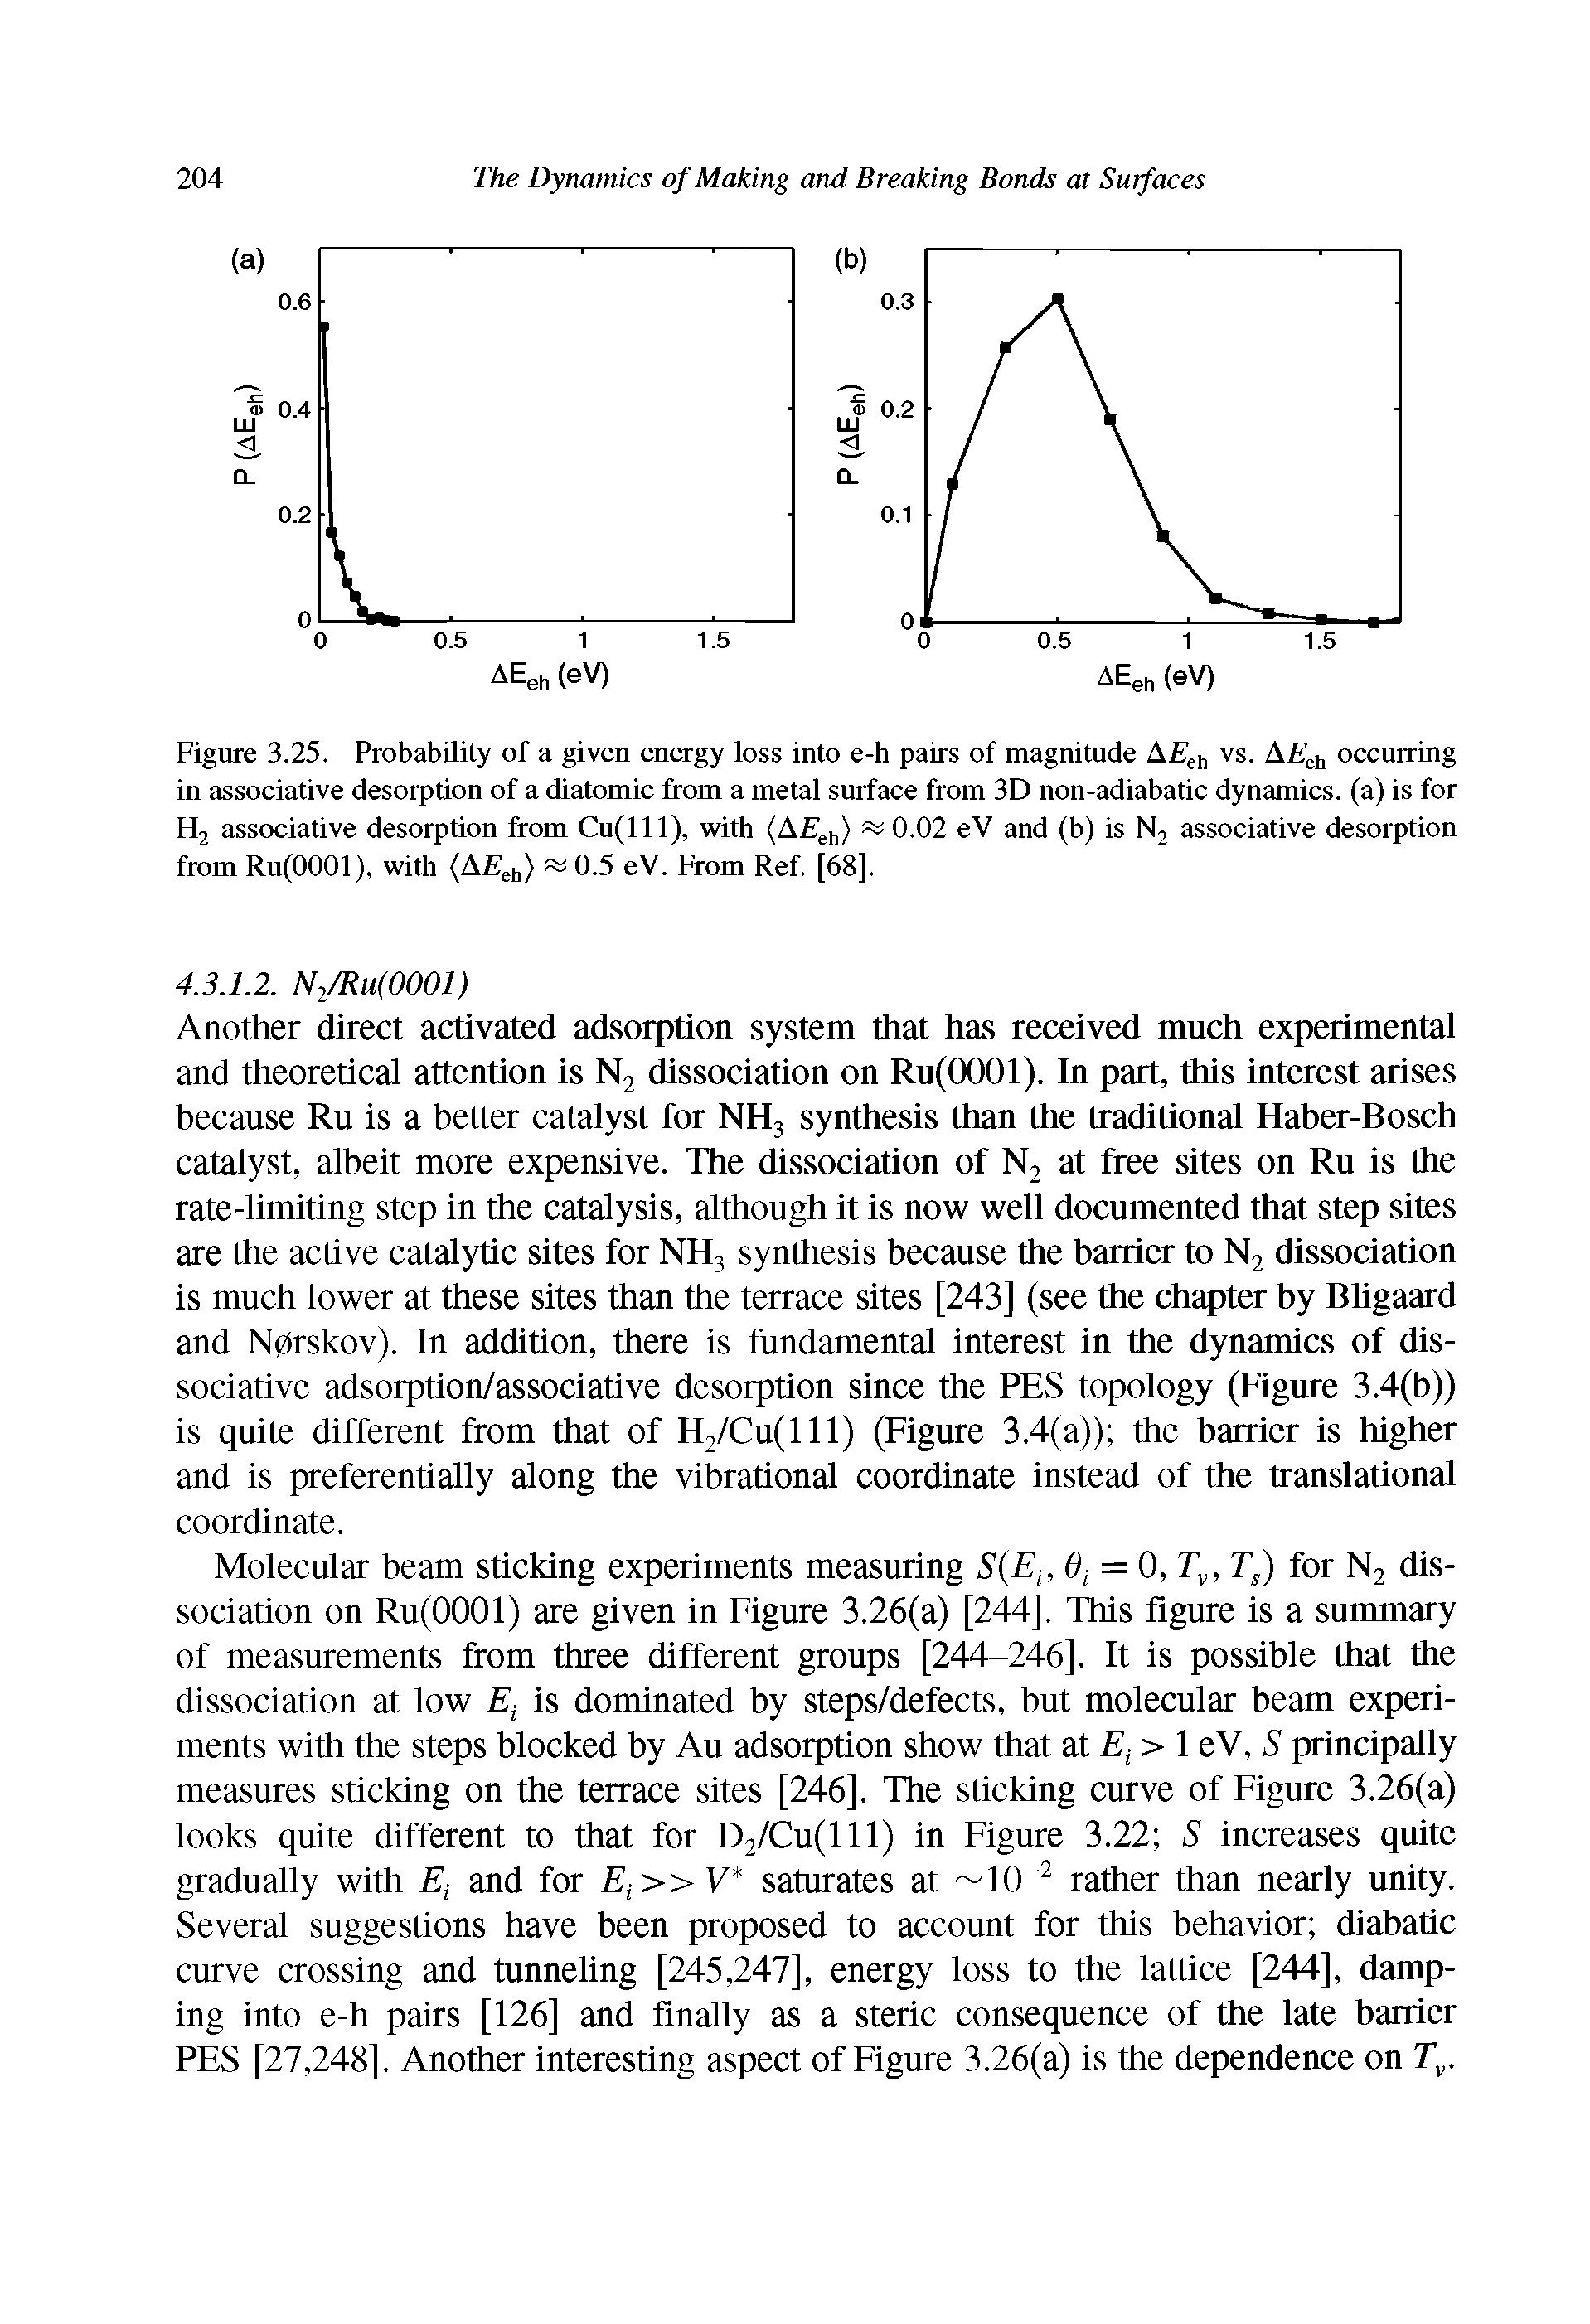 Figure 3.25. Probability of a given energy loss into e-h pairs of magnitude eh vs. A/icM occurring in associative desorption of a diatomic from a metal surface from 3D non-adiabatic dynamics, (a) is for H2 associative desorption from Cu(lll), with ( ) 0.02 eV and (b) is N2 associative desorption from Ru(0001), with (A/i ch) 0.5 eV. From Ref. [68].